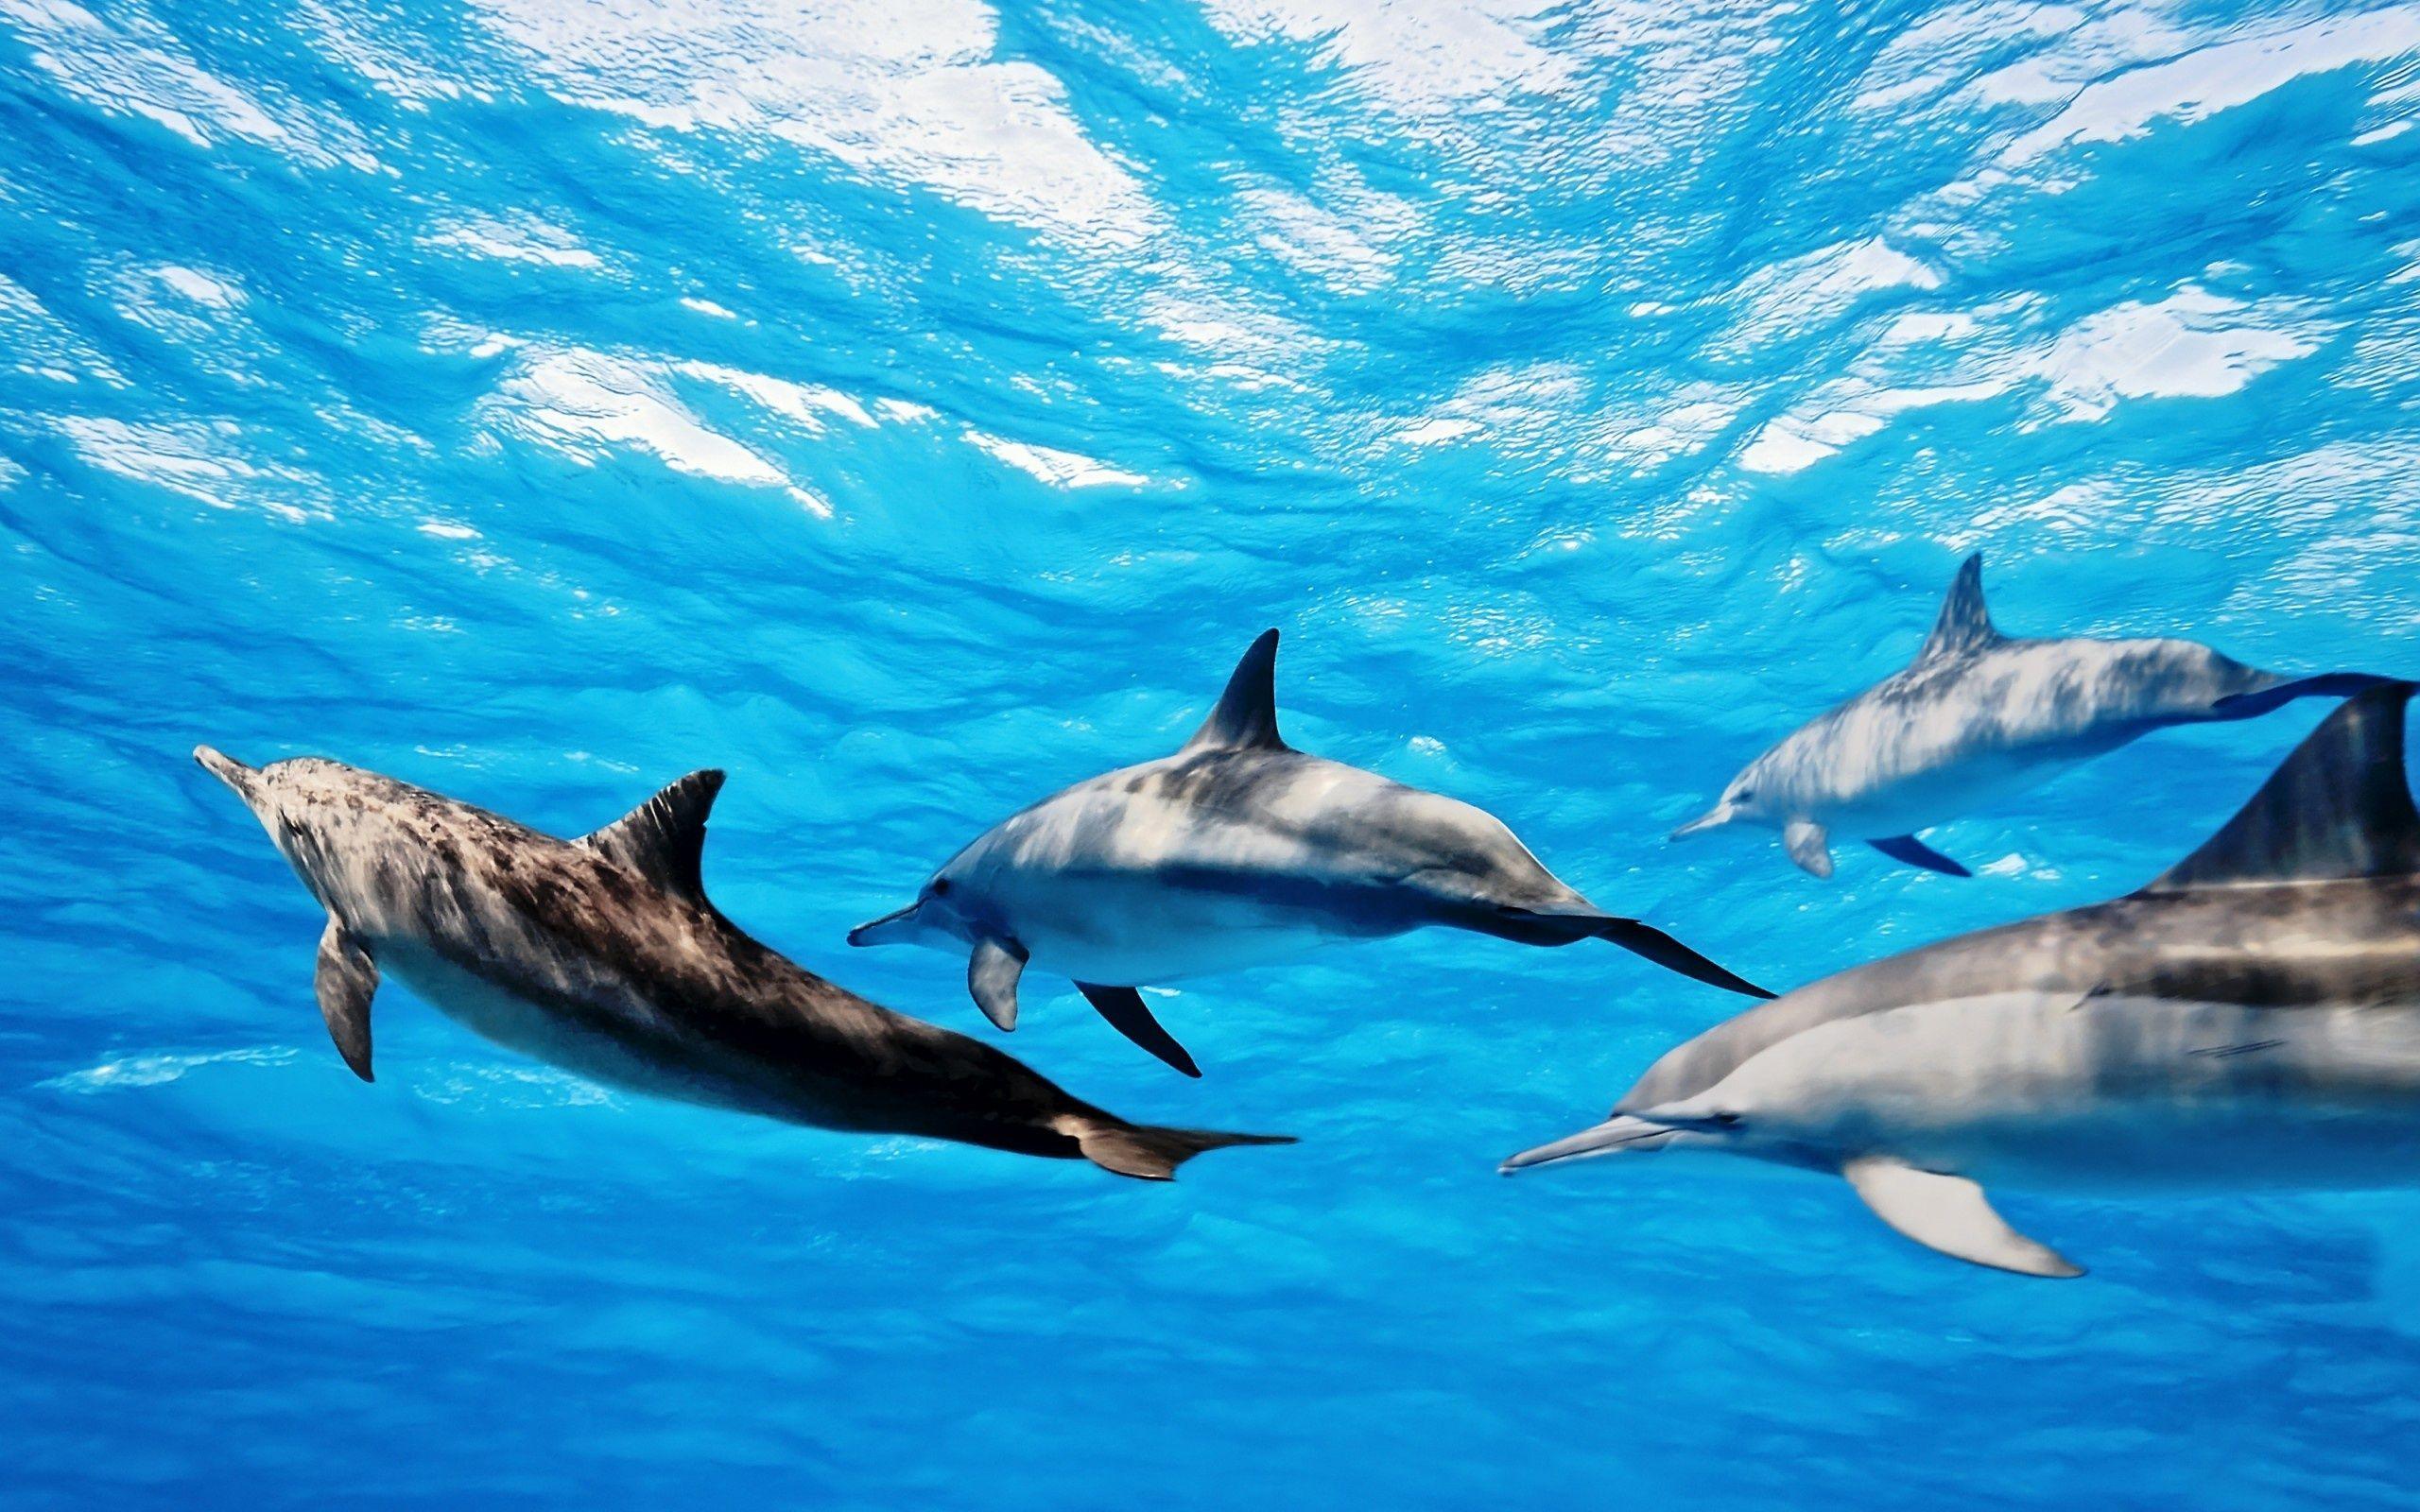 Dolphins Wallpaper, Dolphins Background, Dolphins Free HD Wallpaper